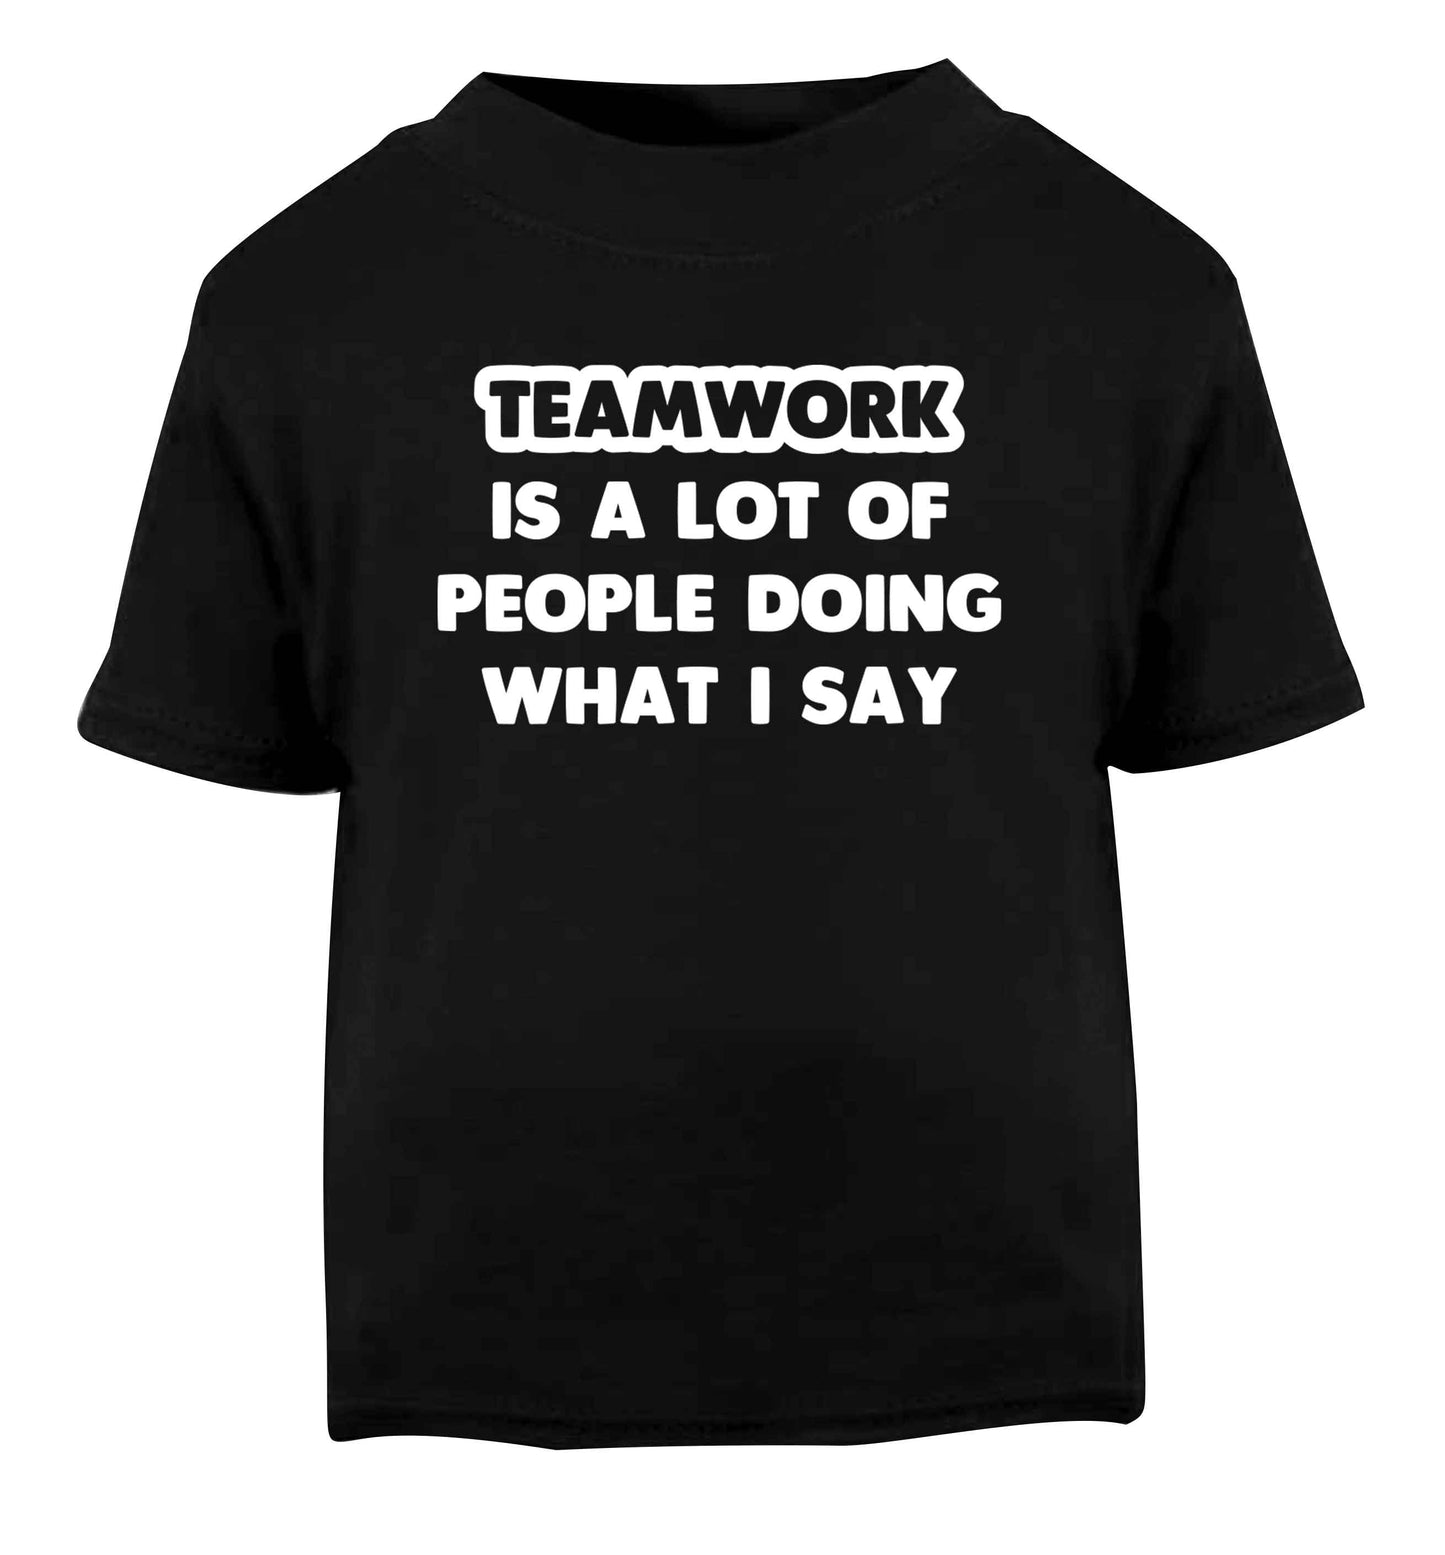 Teamwork is a lot of people doing what I say Black Baby Toddler Tshirt 2 years